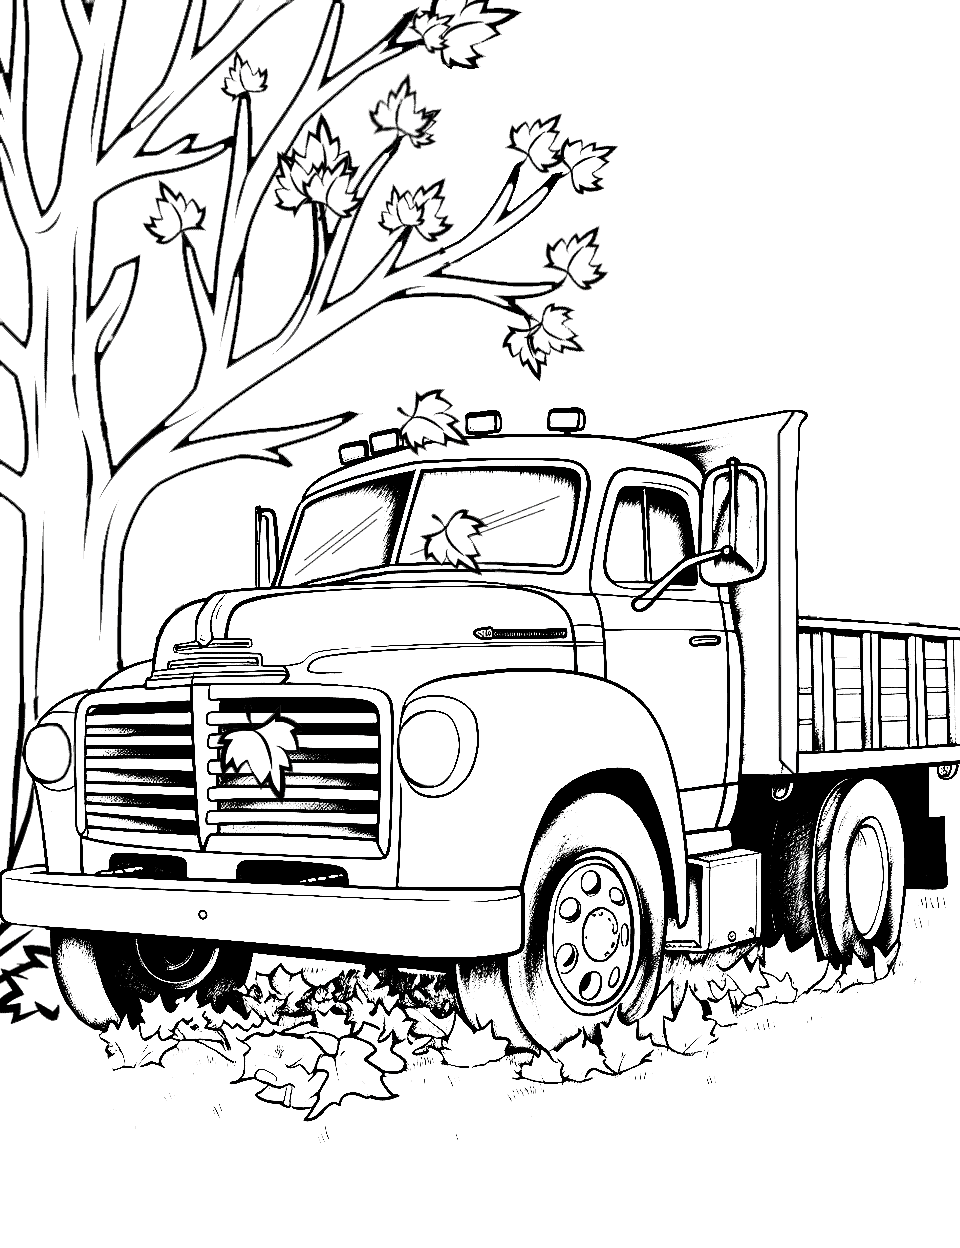 Dodge and the Fall Leaves Coloring Page - A Dodge truck parked under a tree, with colorful fall leaves falling down.